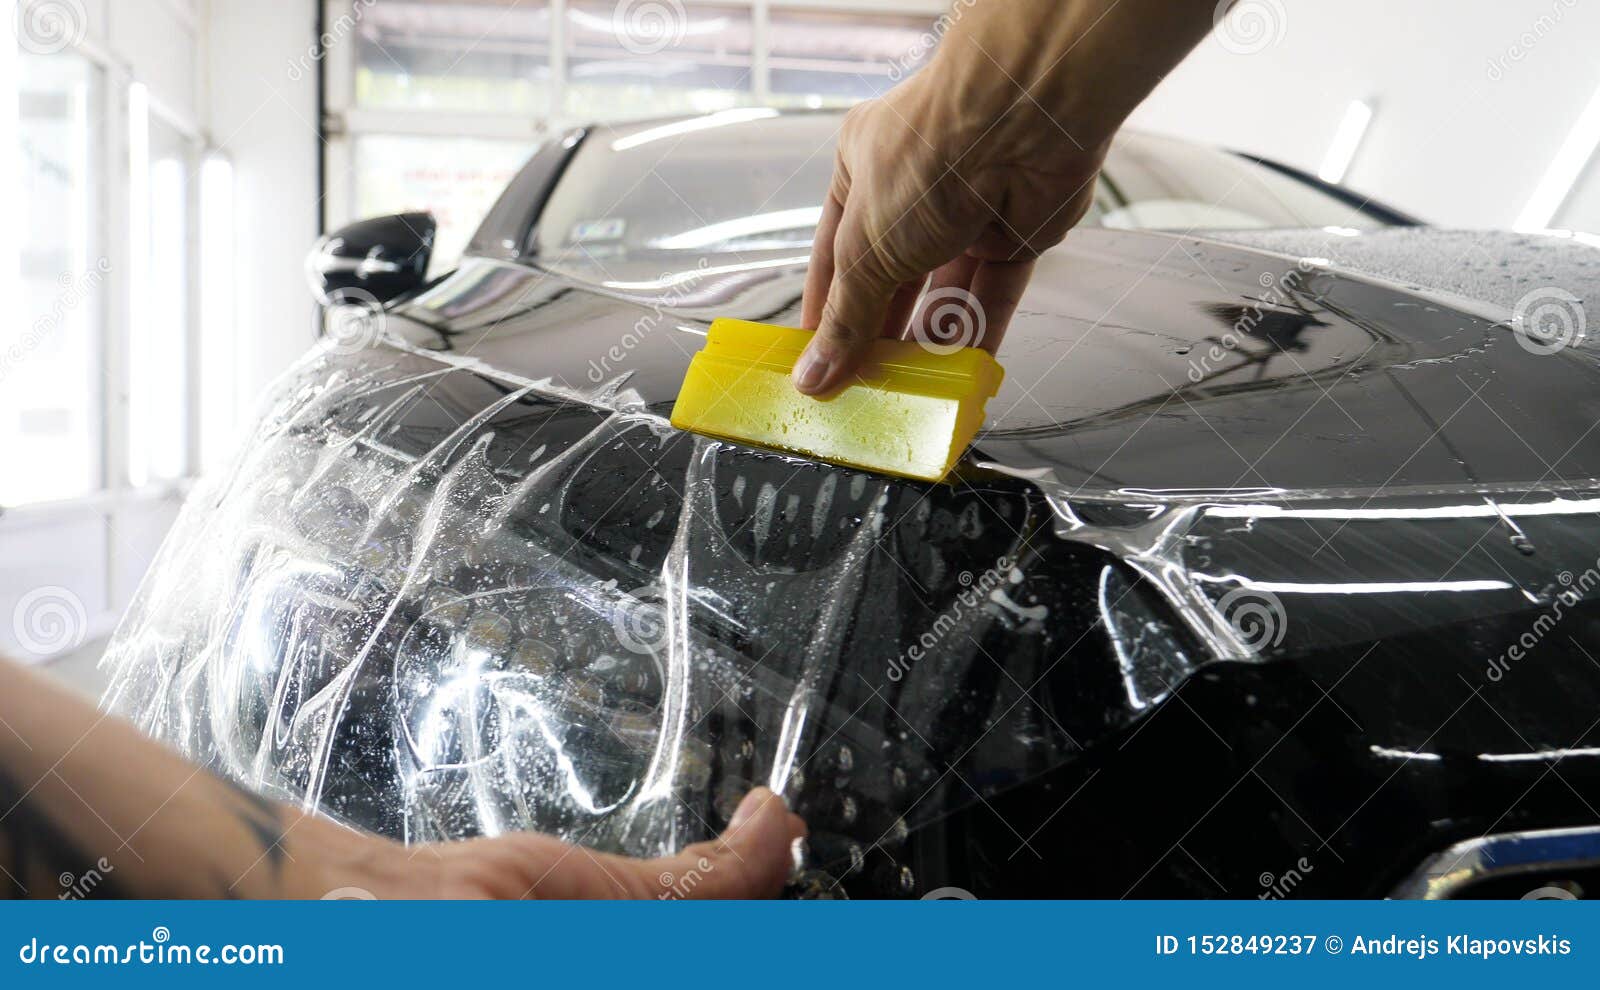 https://thumbs.dreamstime.com/z/close-up-to-ppf-installation-process-front-rear-headlight-bamper-ppf-paint-protection-film-which-protect-paint-152849237.jpg